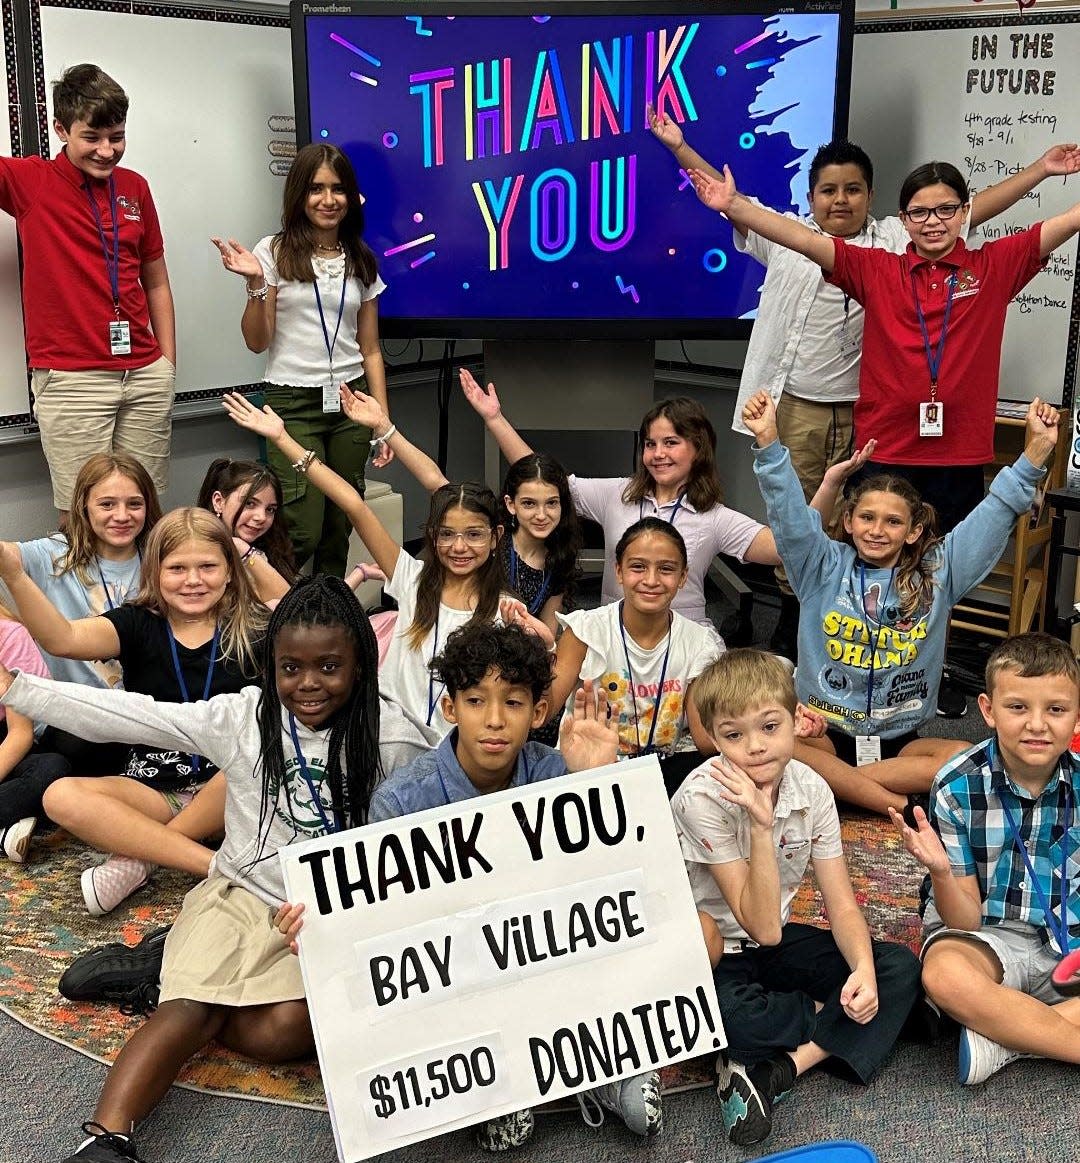 Students at Wilkinson Elementary School salute senior residents at Bay Village who recently donated $11,500 to the Sarasota school, helping teachers obtain essential classroom aids. Bay Village and Wilkinson Elementary established a partnership in 2019. The alliance has resulted in ongoing projects such as monthly Pen Pal letters, an annual Pen Pal picnic, Student Chorus performances, collaborative science projects, fundraising and more. Visit bayvillage.org.